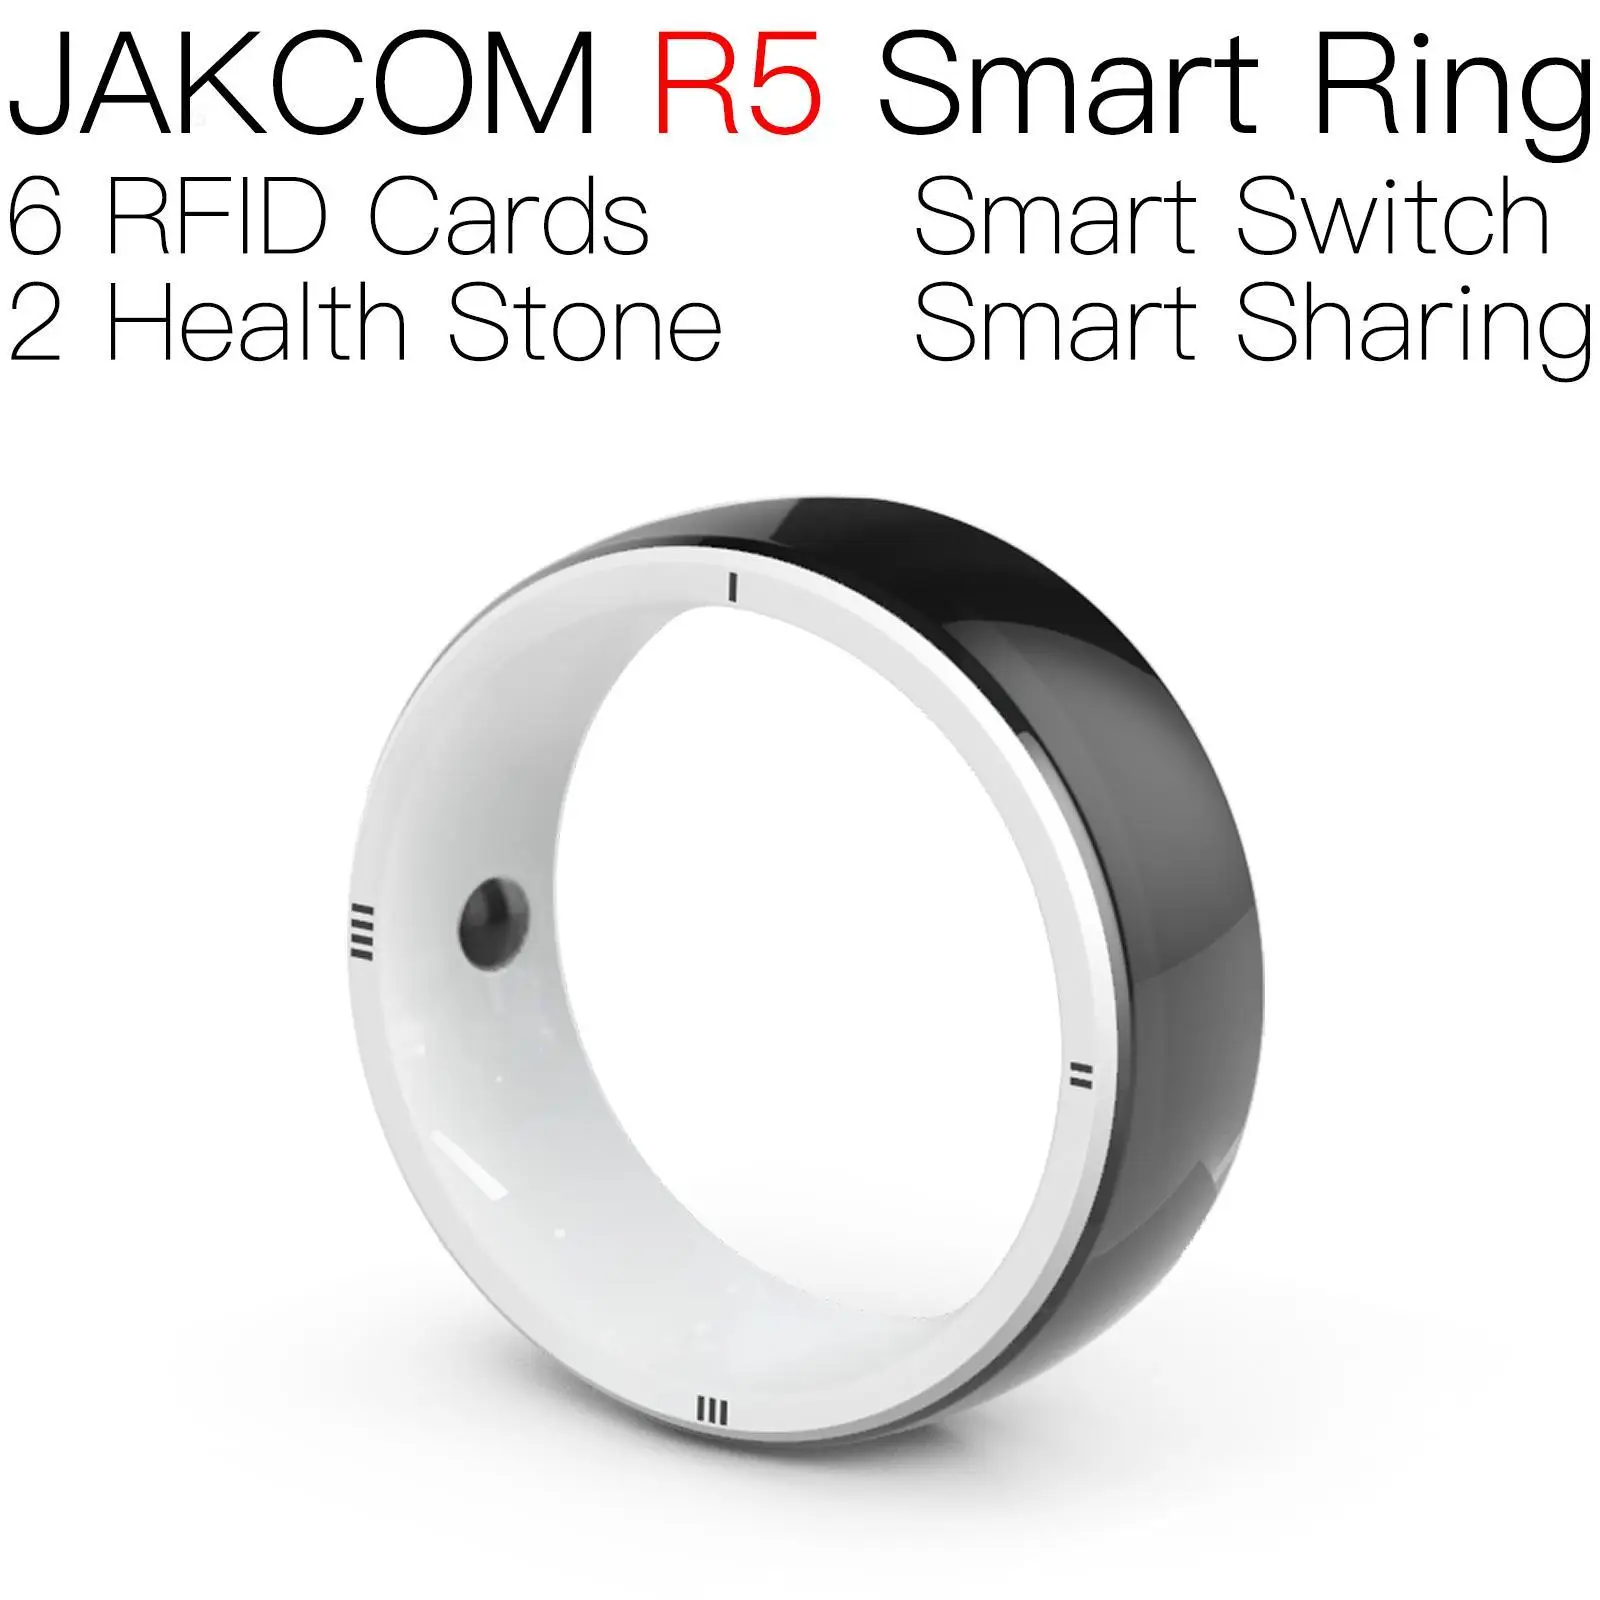 

JAKCOM R5 Smart Ring Super value than metal card switch rfid duplicator tags de nfc chip id carding tag for electra